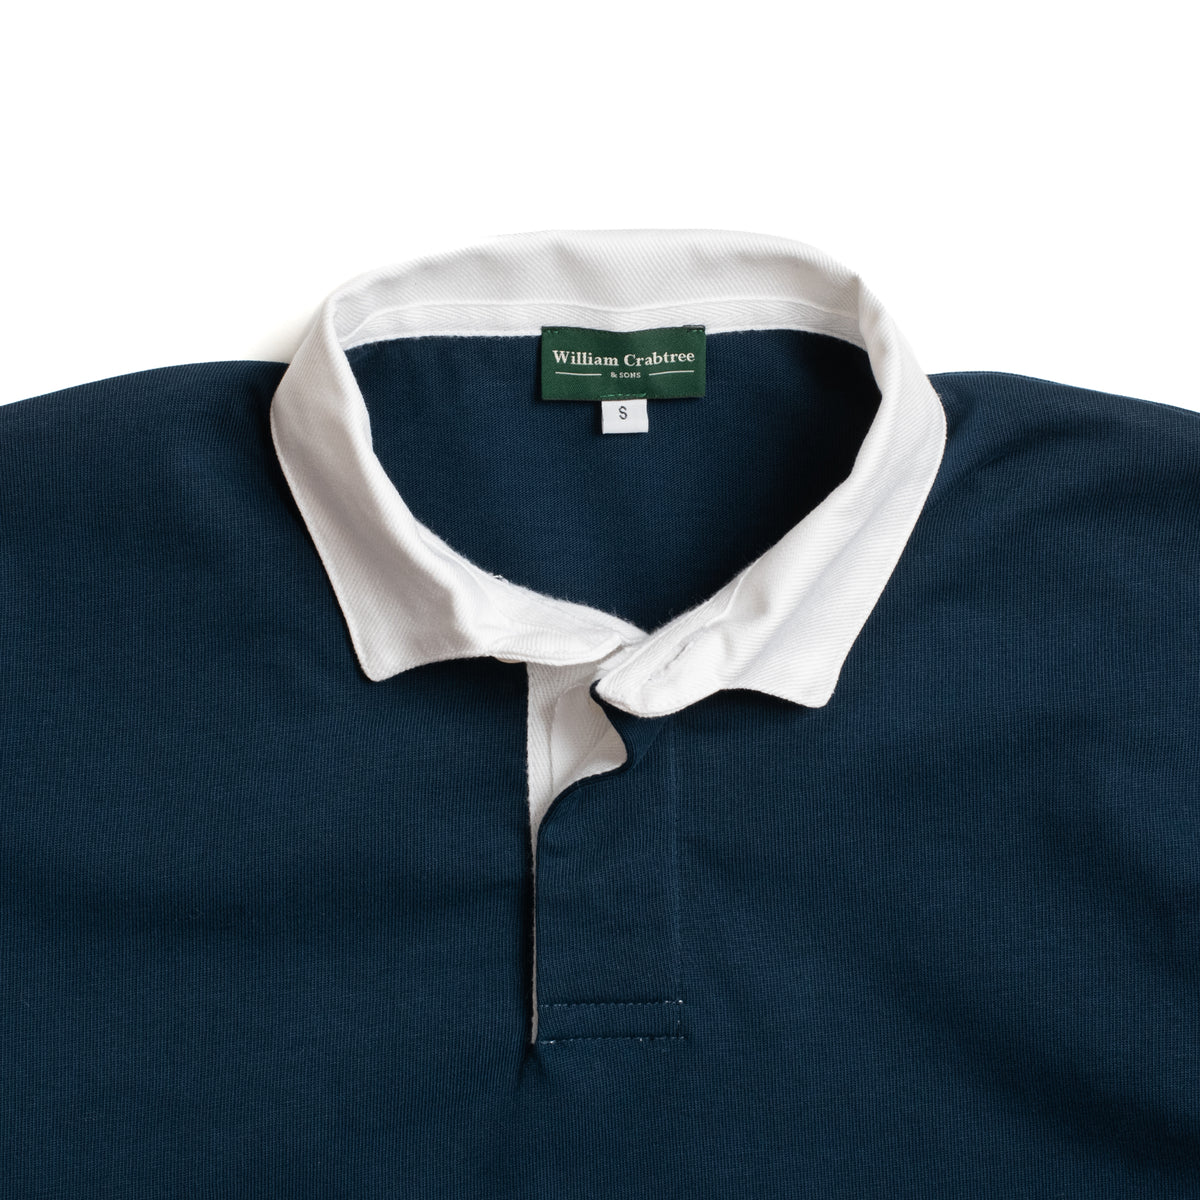 Navy Rugby Shirt